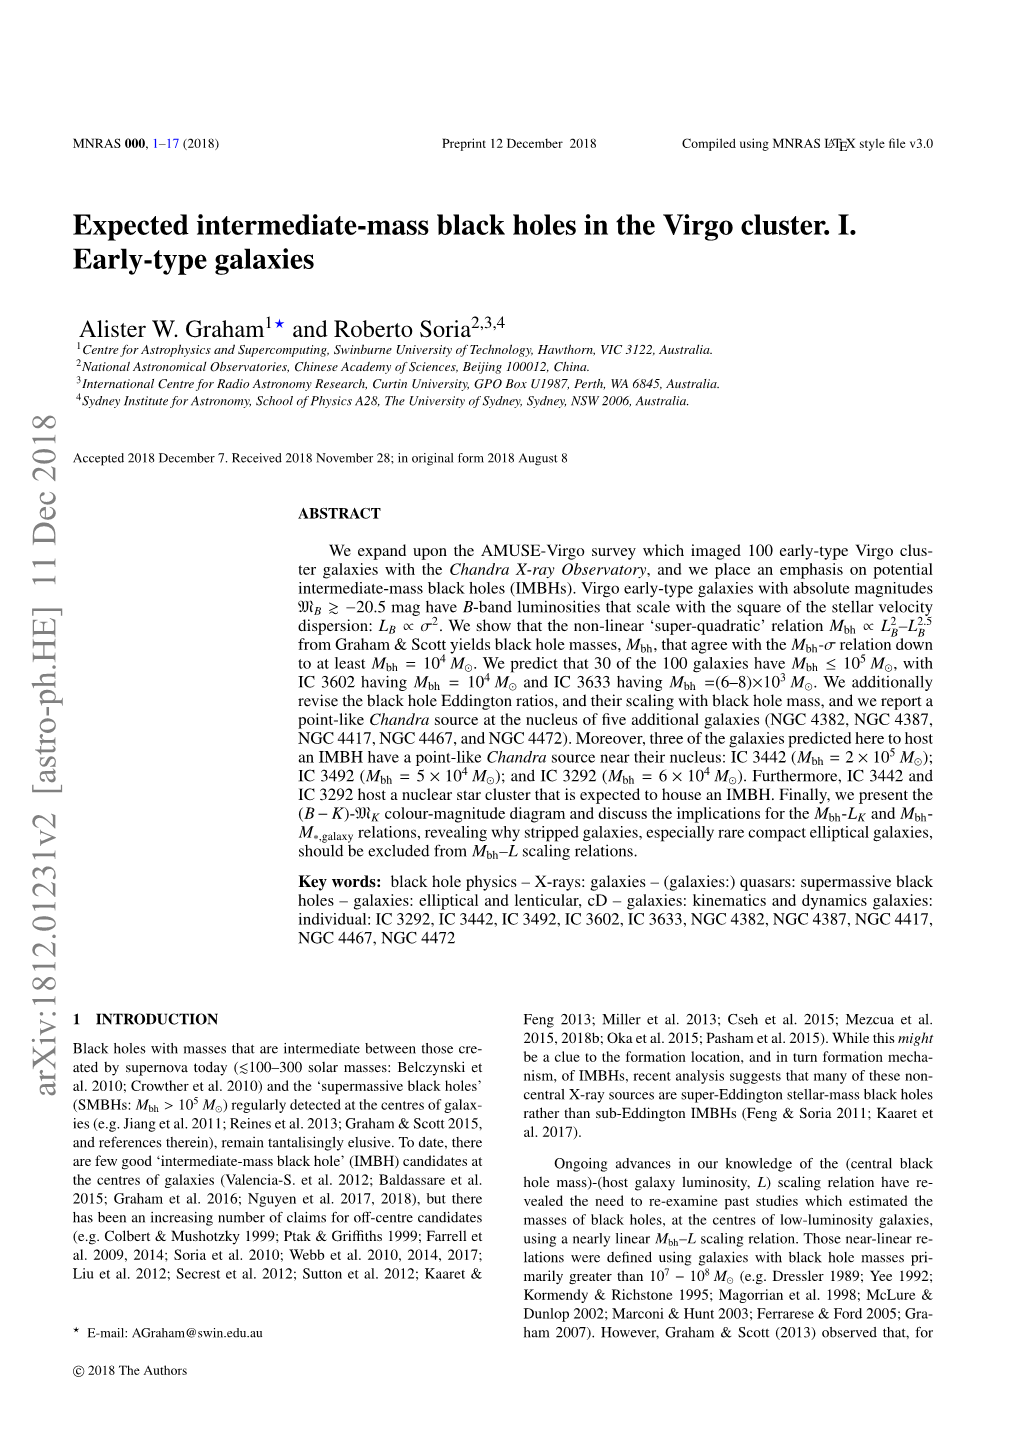 Expected Intermediate-Mass Black Holes in the Virgo Cluster. I. Early-Type Galaxies